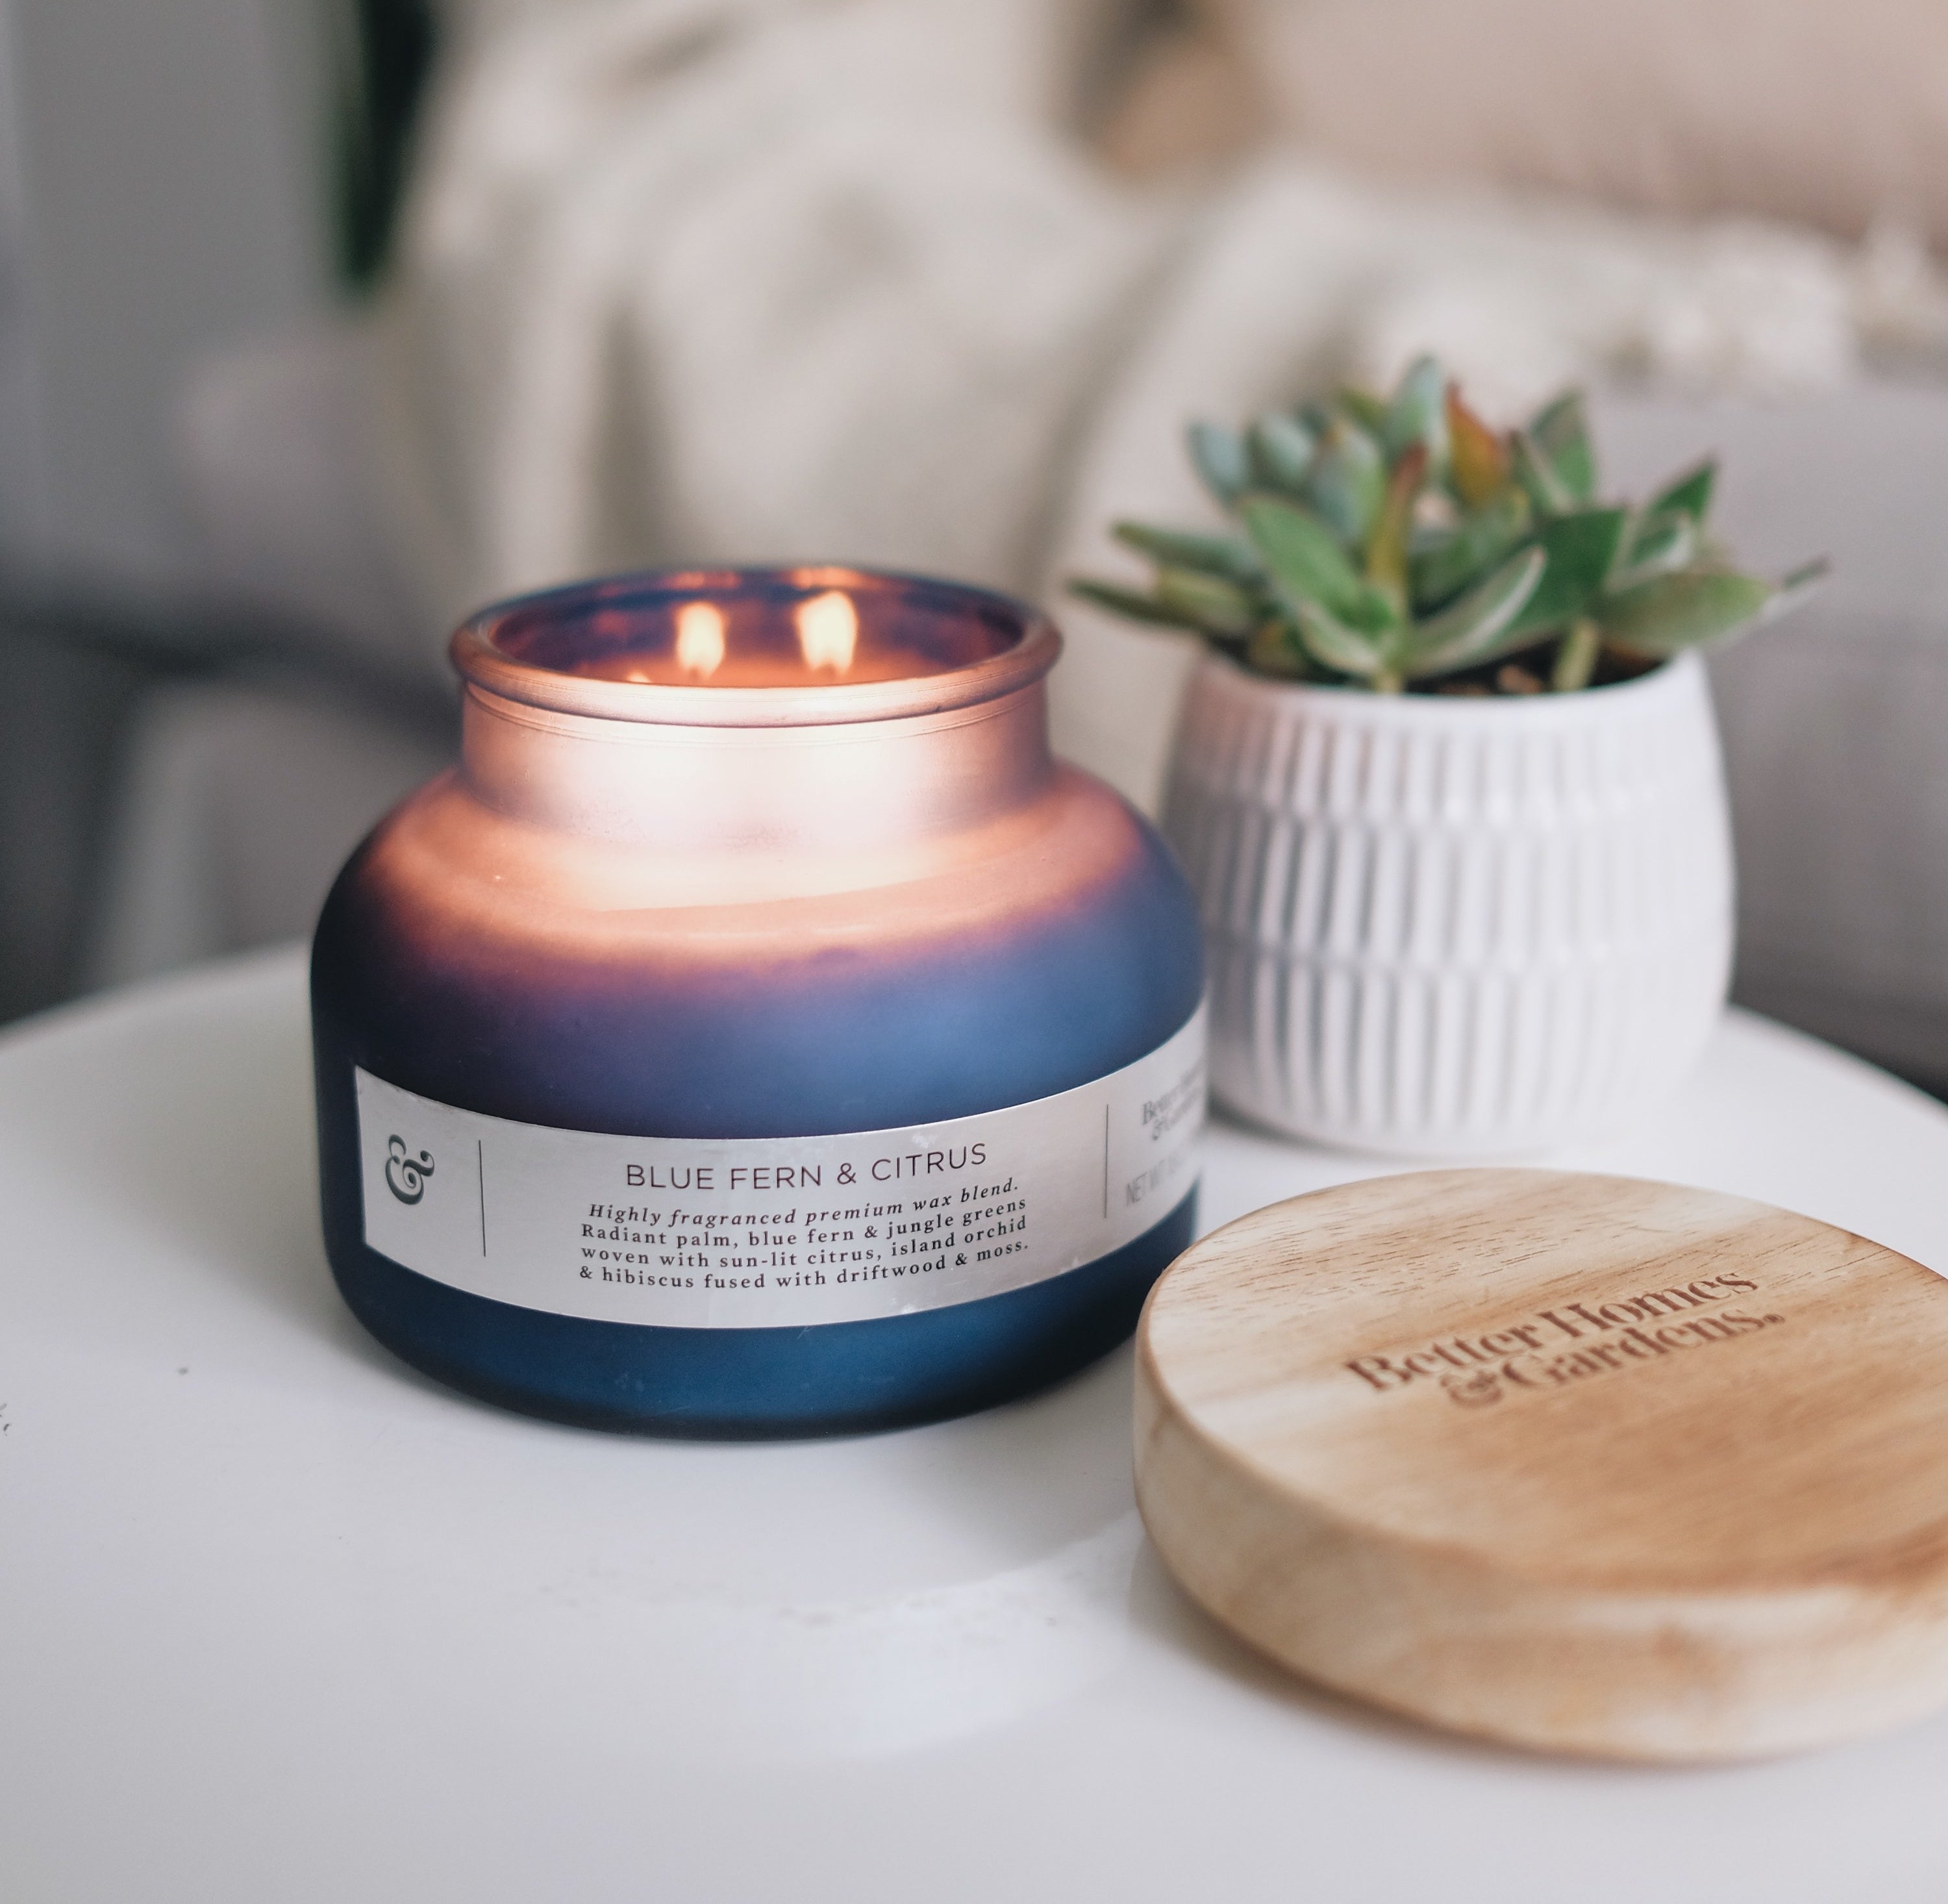 The blue fern and citrus scented two-wick candle